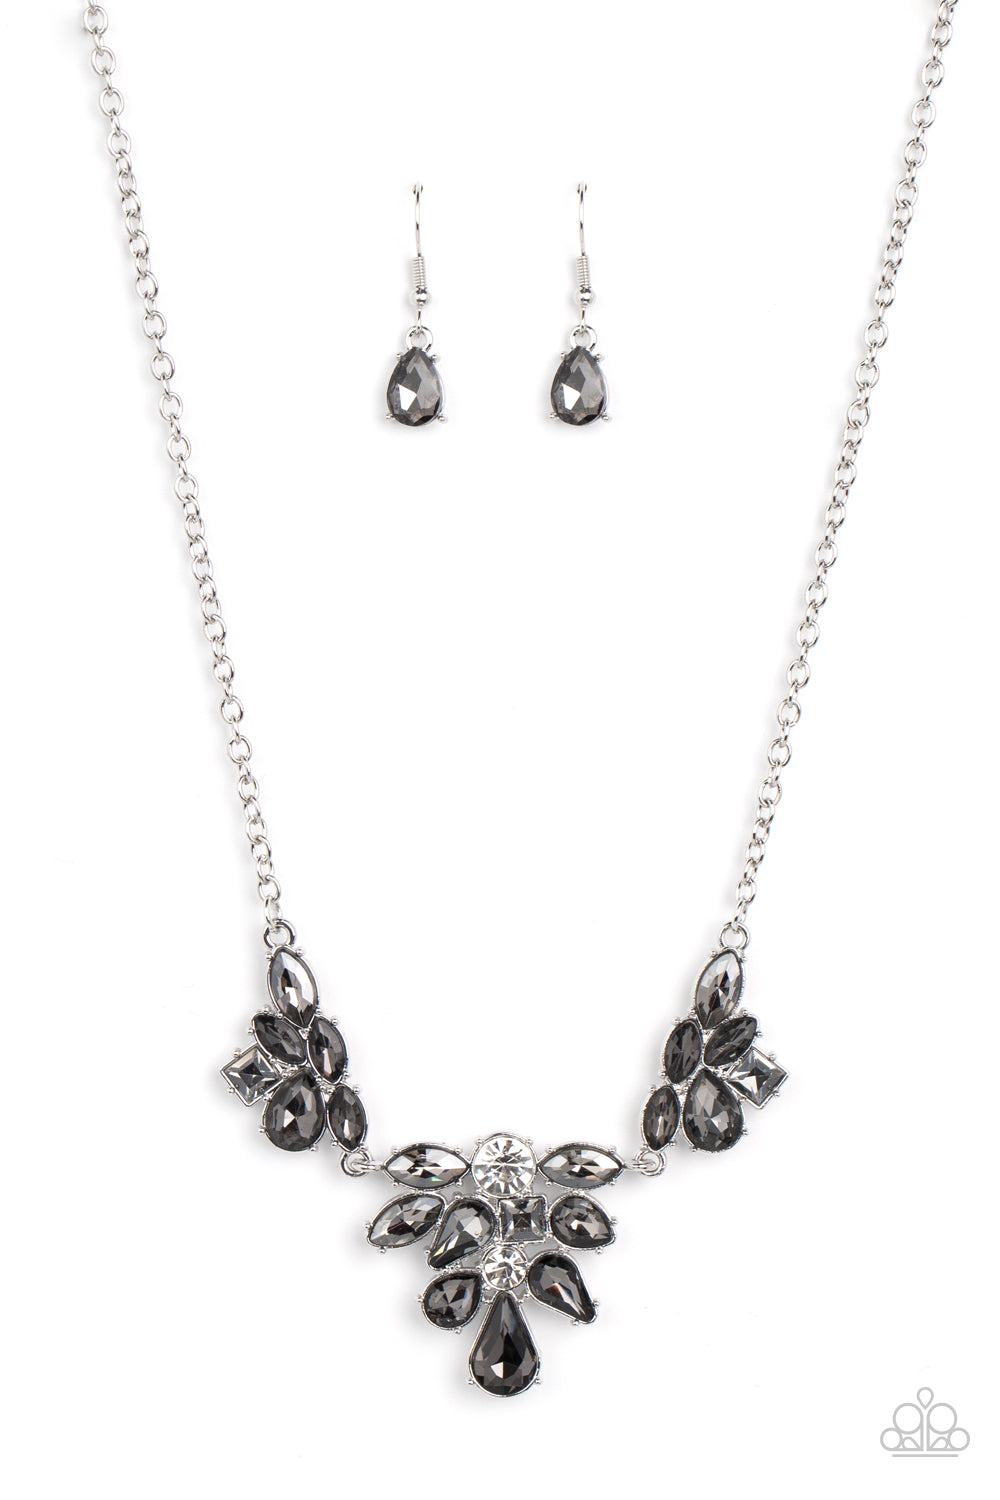 Completely Captivated - Silver Paparazzi  Necklace